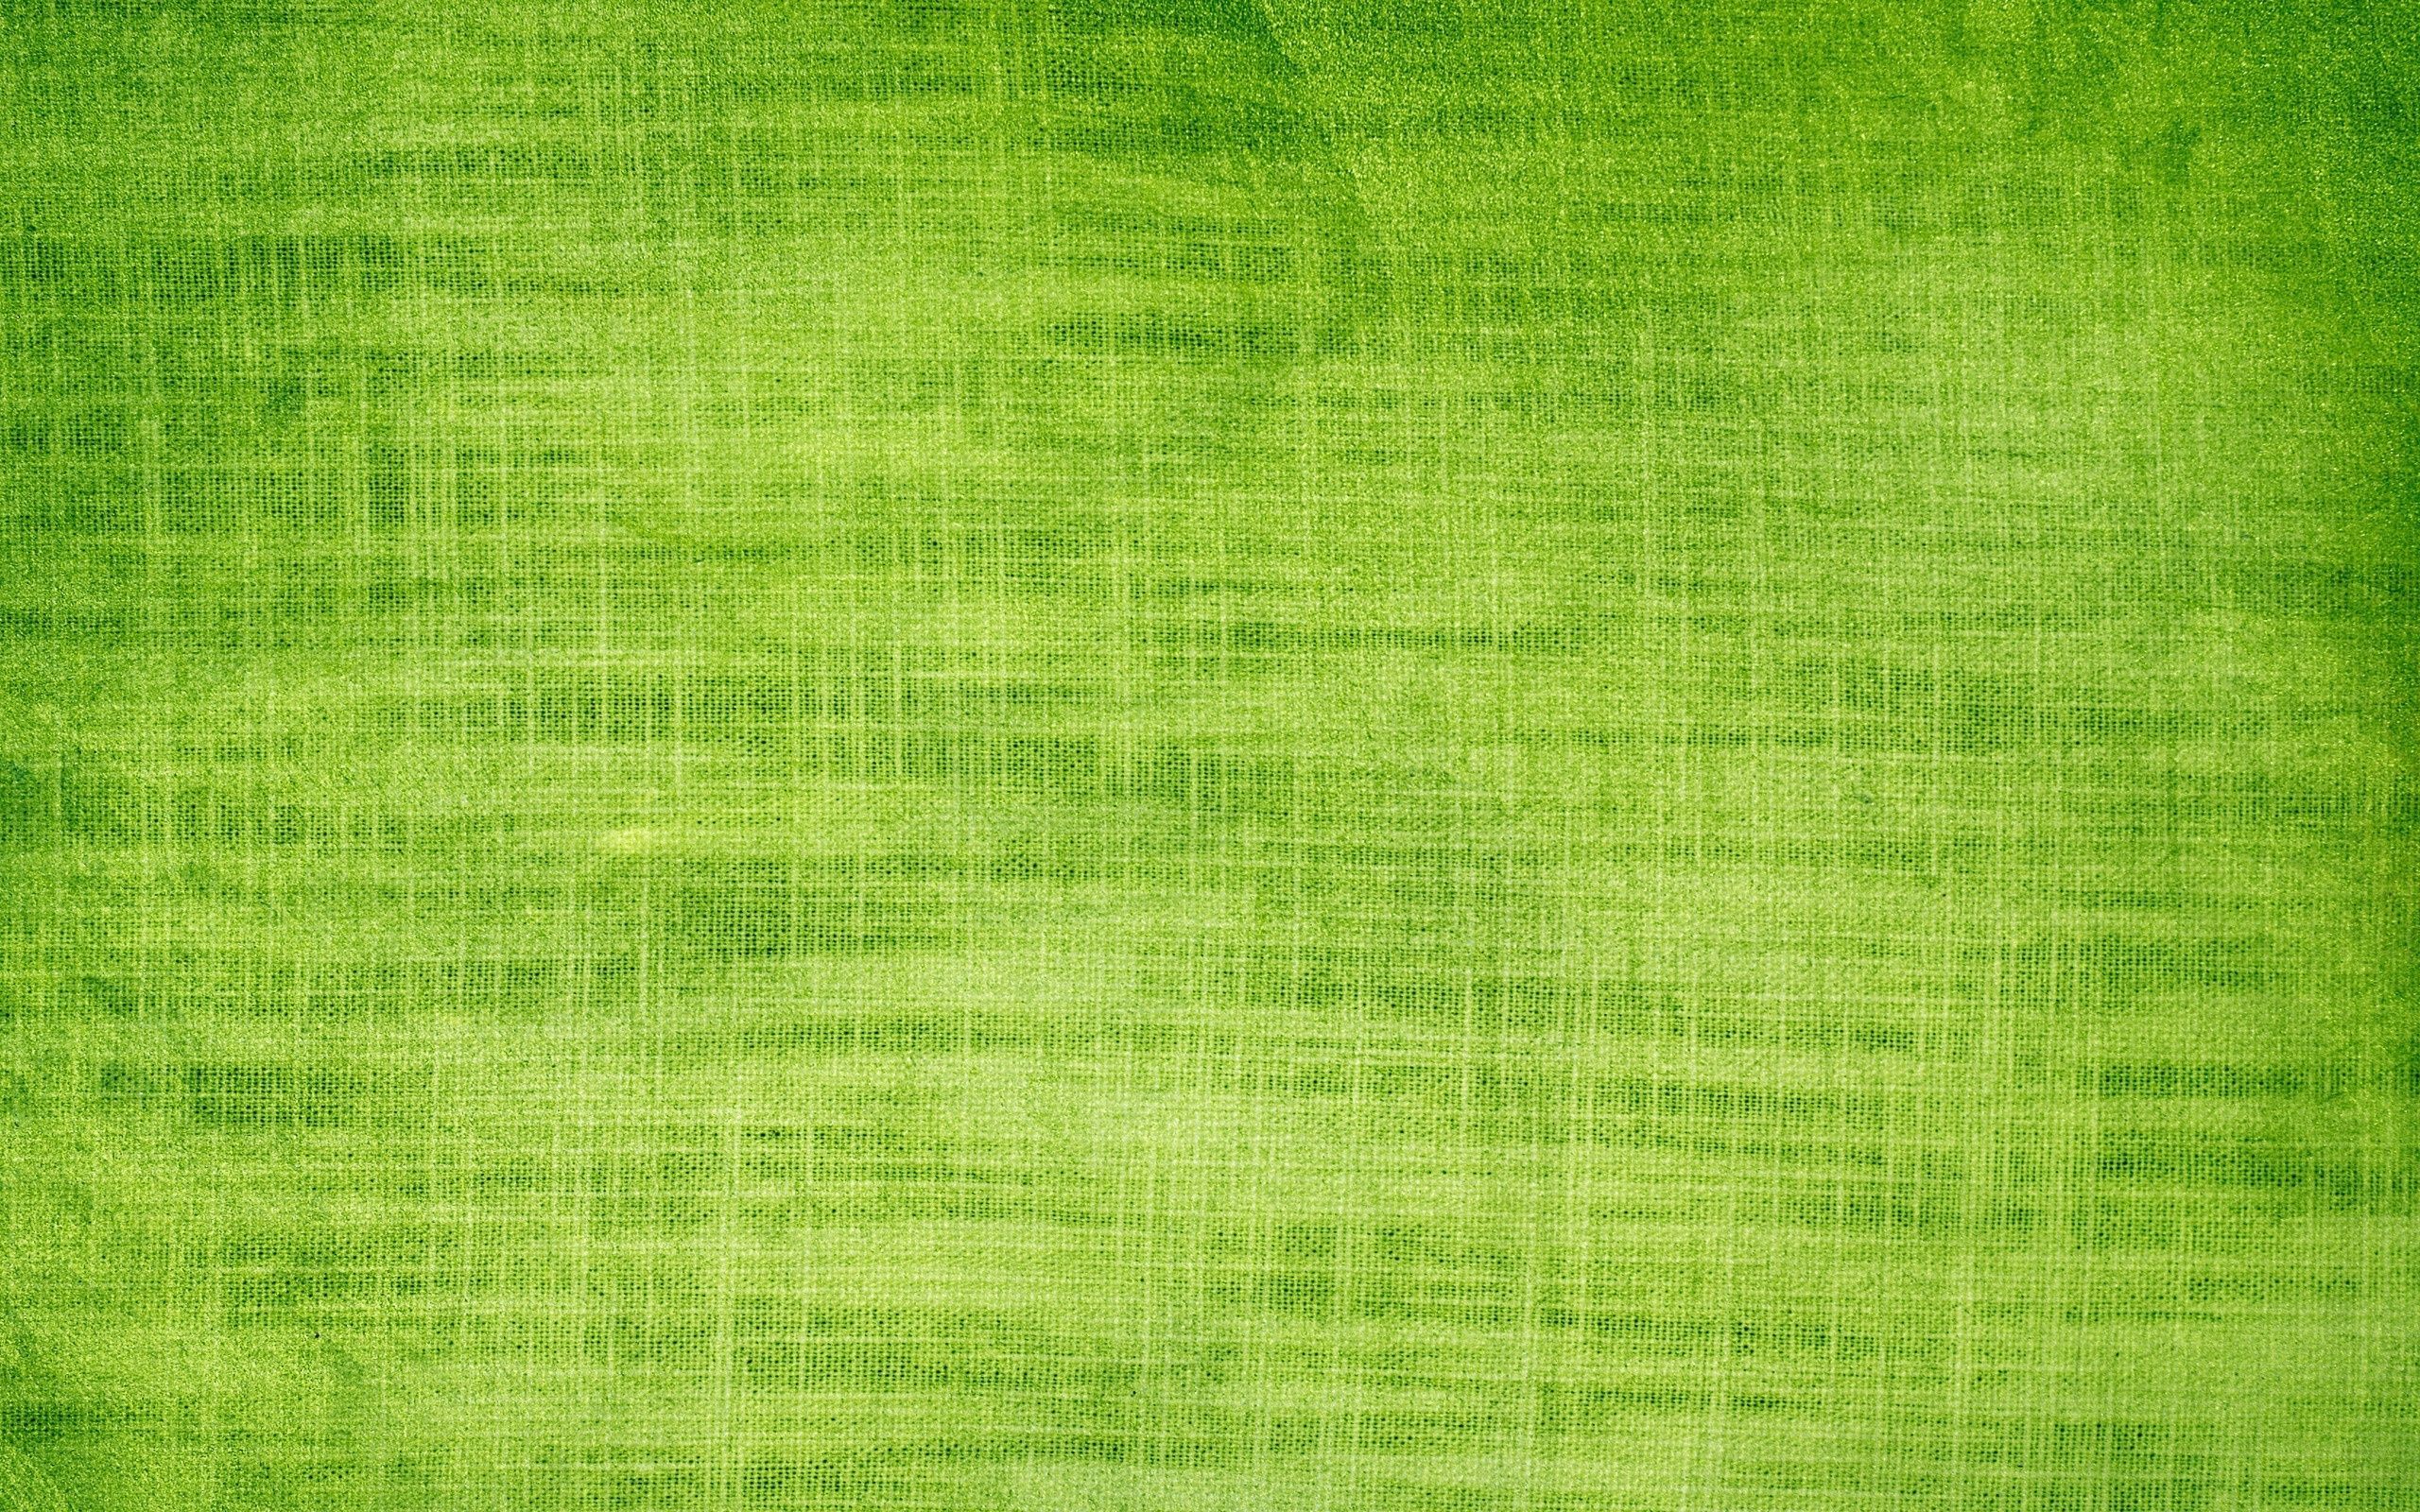 Bright green background wallpapers and images - wallpapers